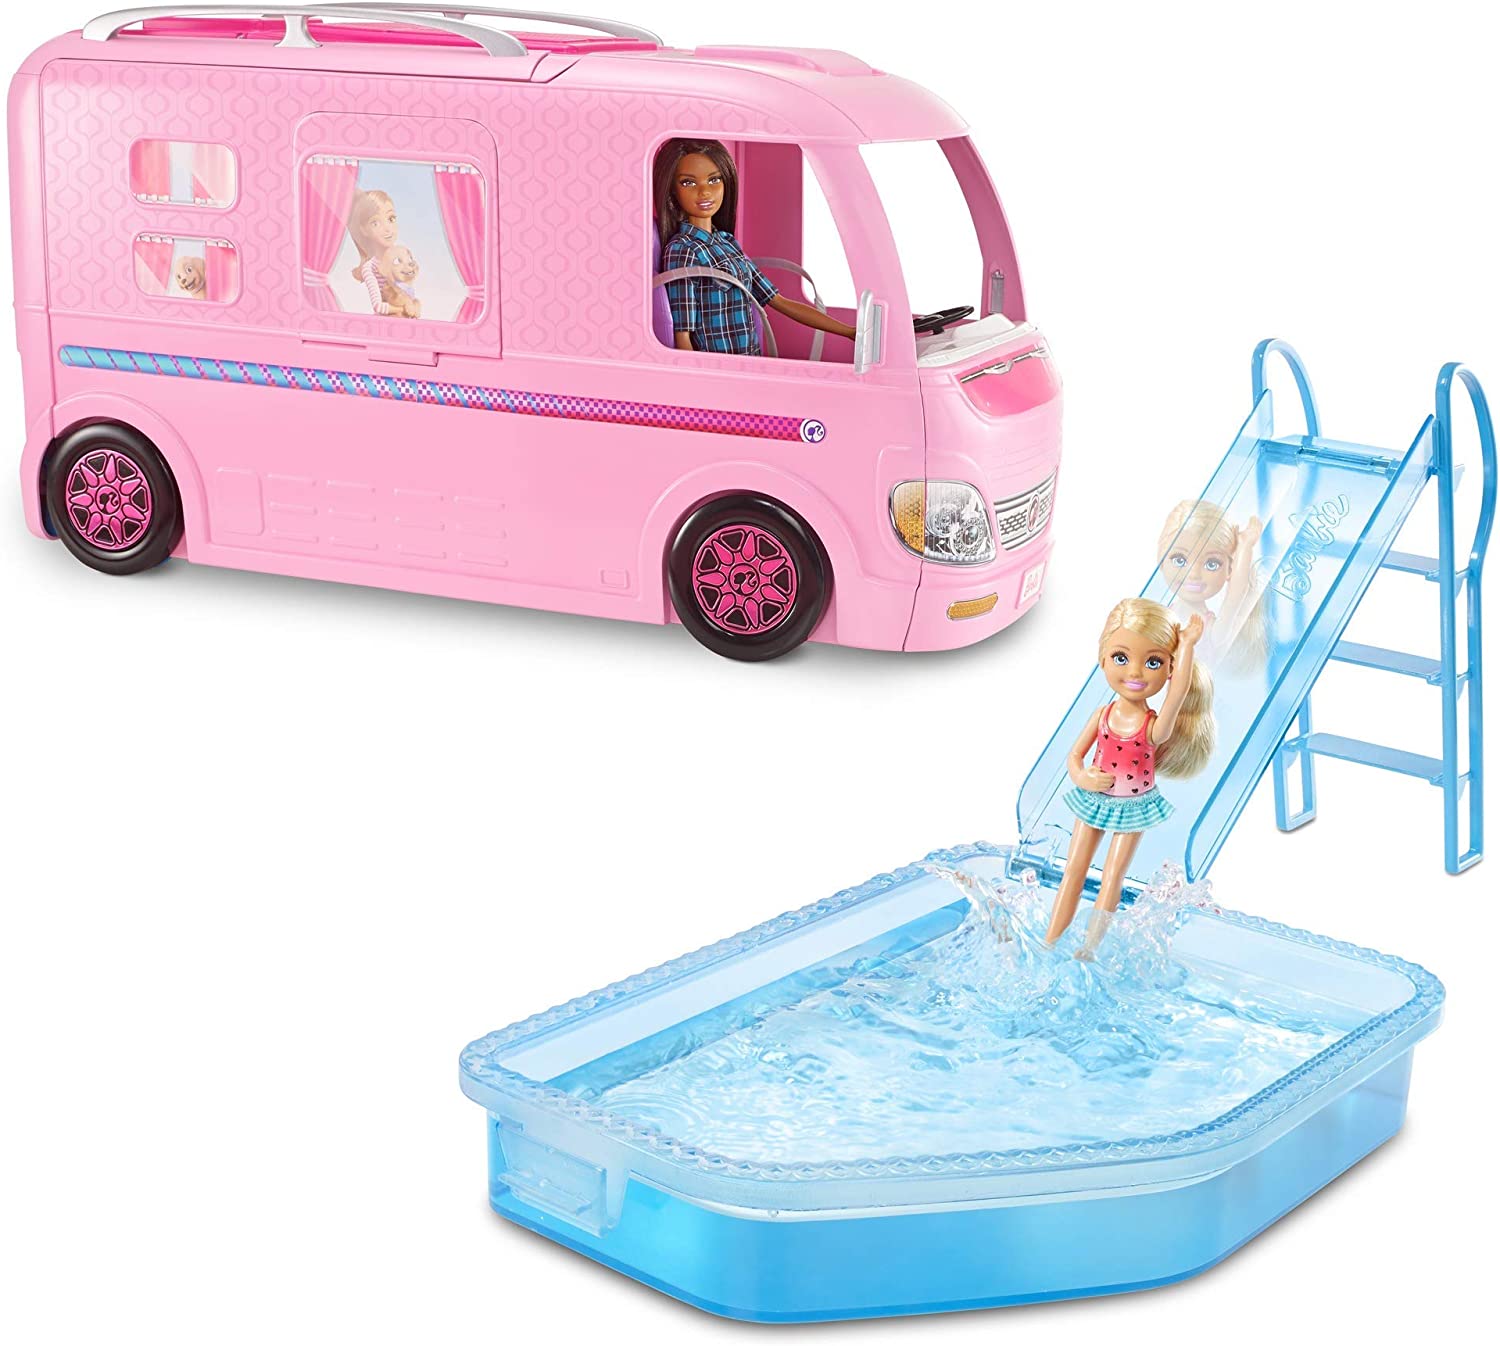 Barbie Camper Playset, Dreamcamper Toy Vehicle with 50 Accessories  Including Furniture, Pool & Slide, Hammocks & Fireplace